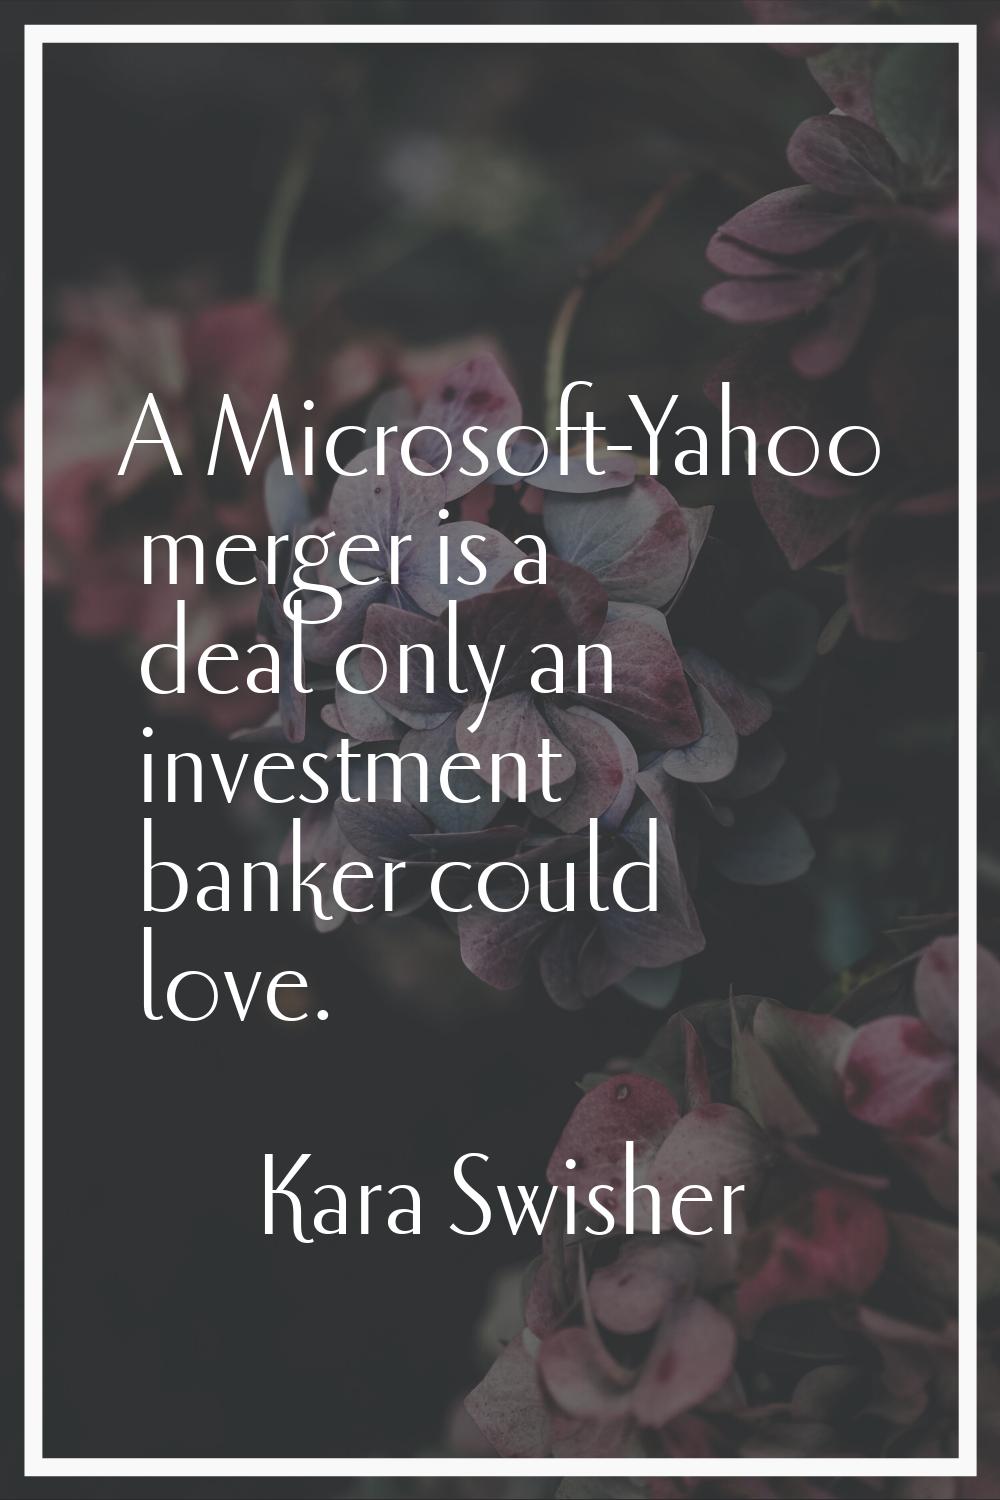 A Microsoft-Yahoo merger is a deal only an investment banker could love.